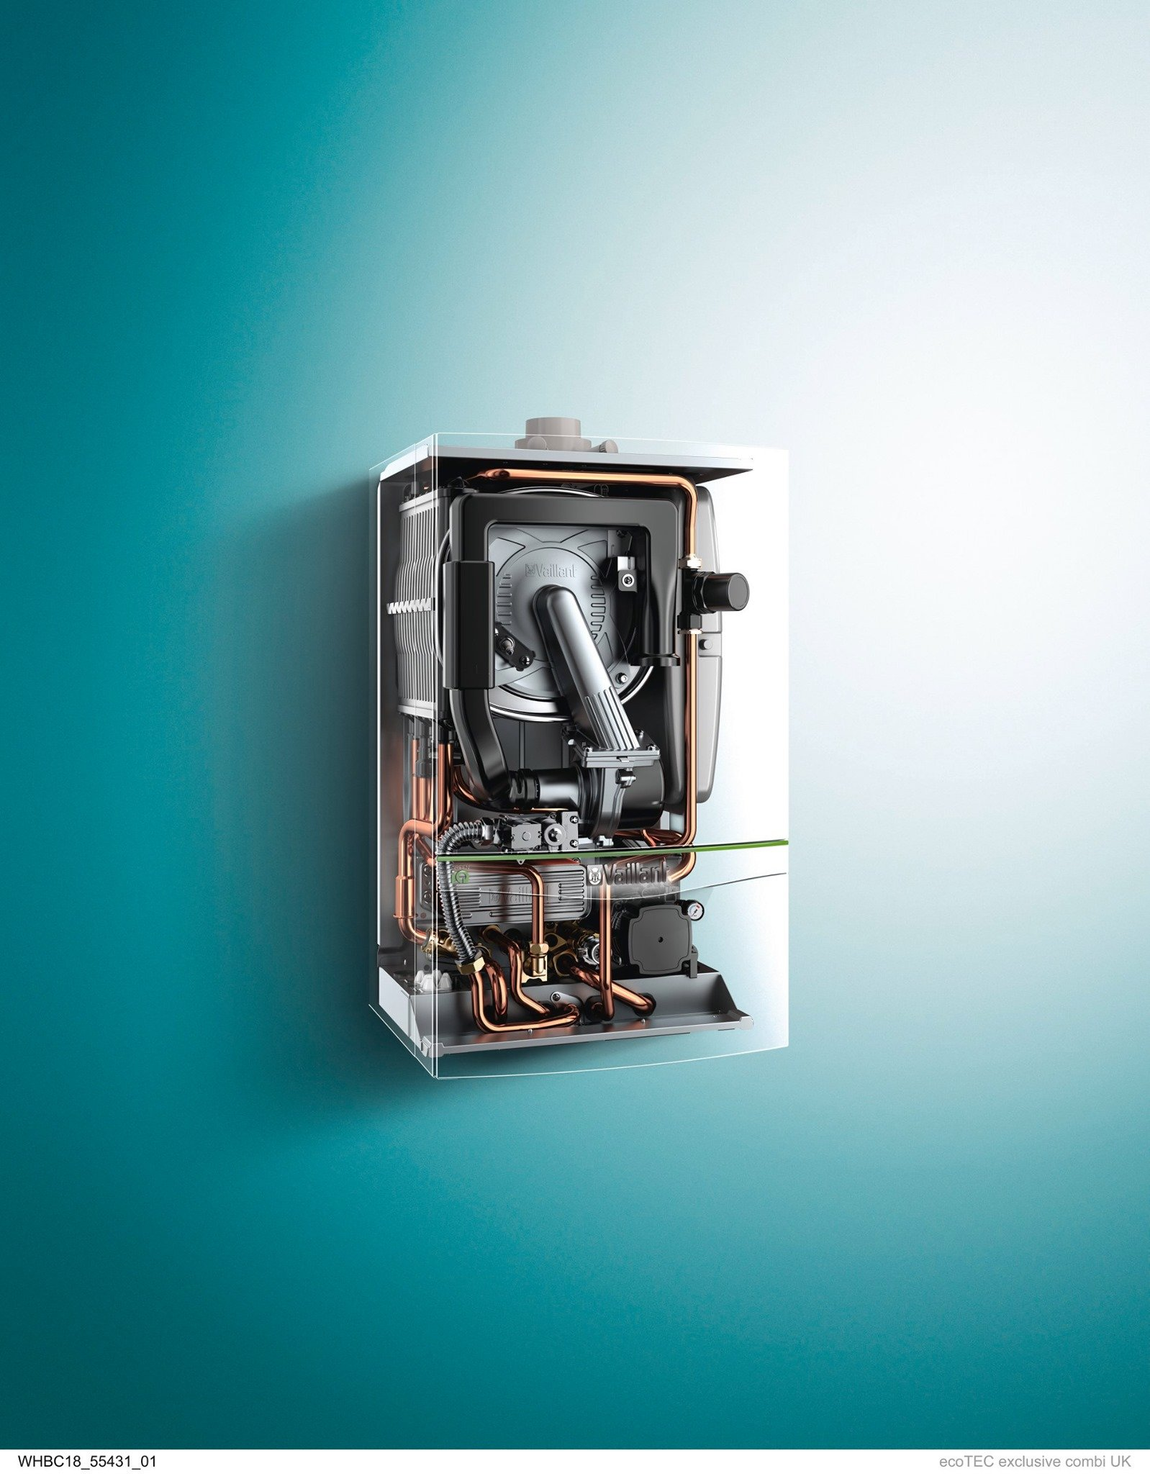 upto 10 year guarantee on Vaillant Boilers